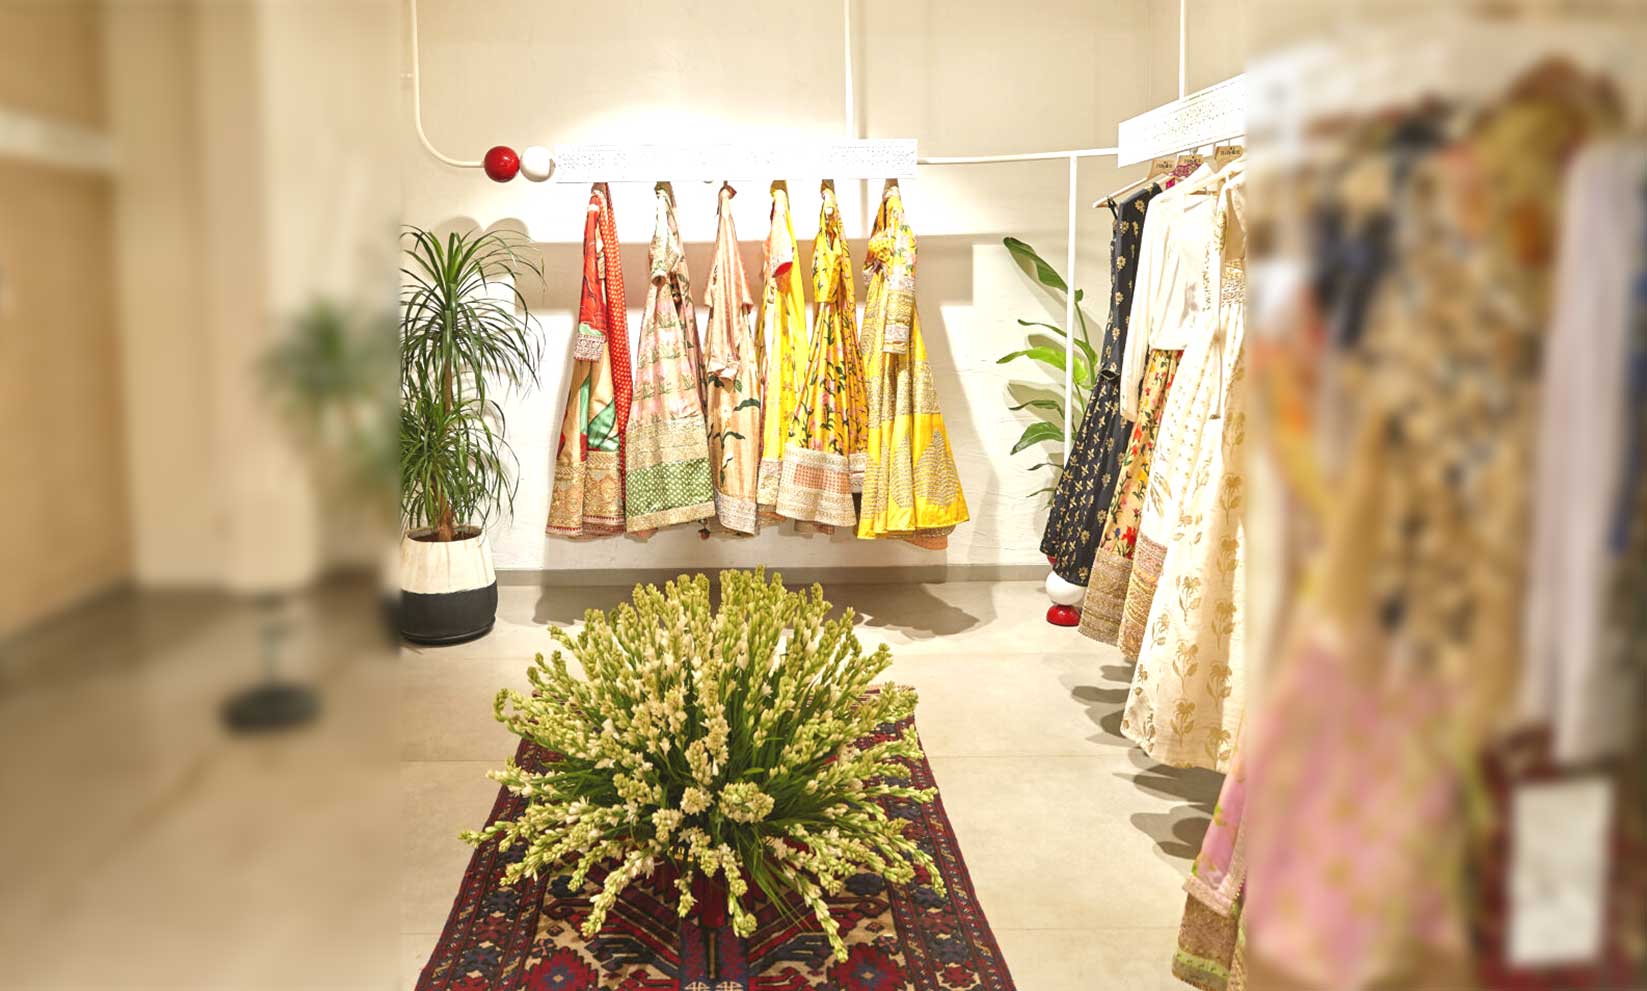 Image: House of Masaba,  A brand rooted in Indian craft with an element of quirk and personality by Restore Design, 2023